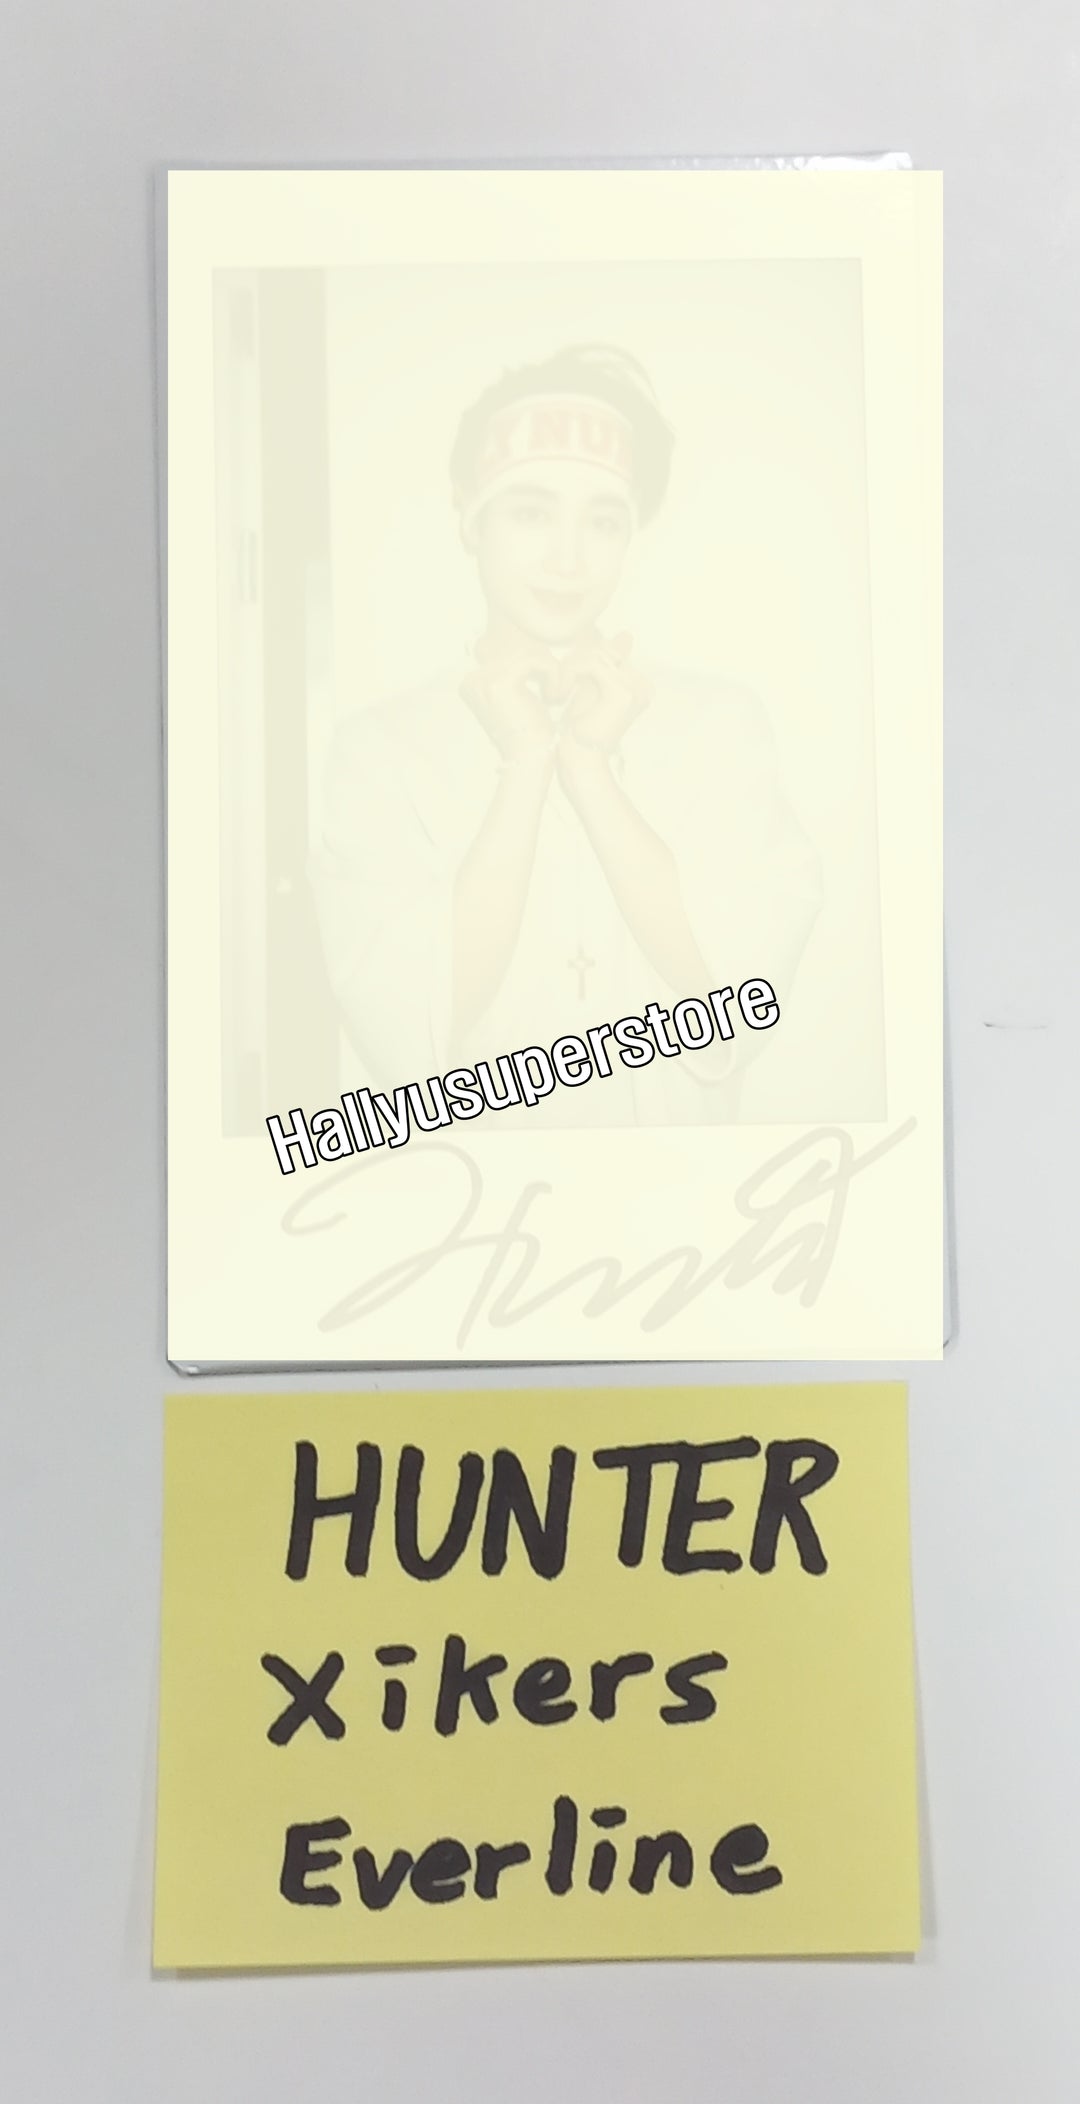 HUNTER (Of Xikers) "HOUSE OF TRICKY : How to Play" - Hand Autographed(Signed) Polaroid [23.09.15]